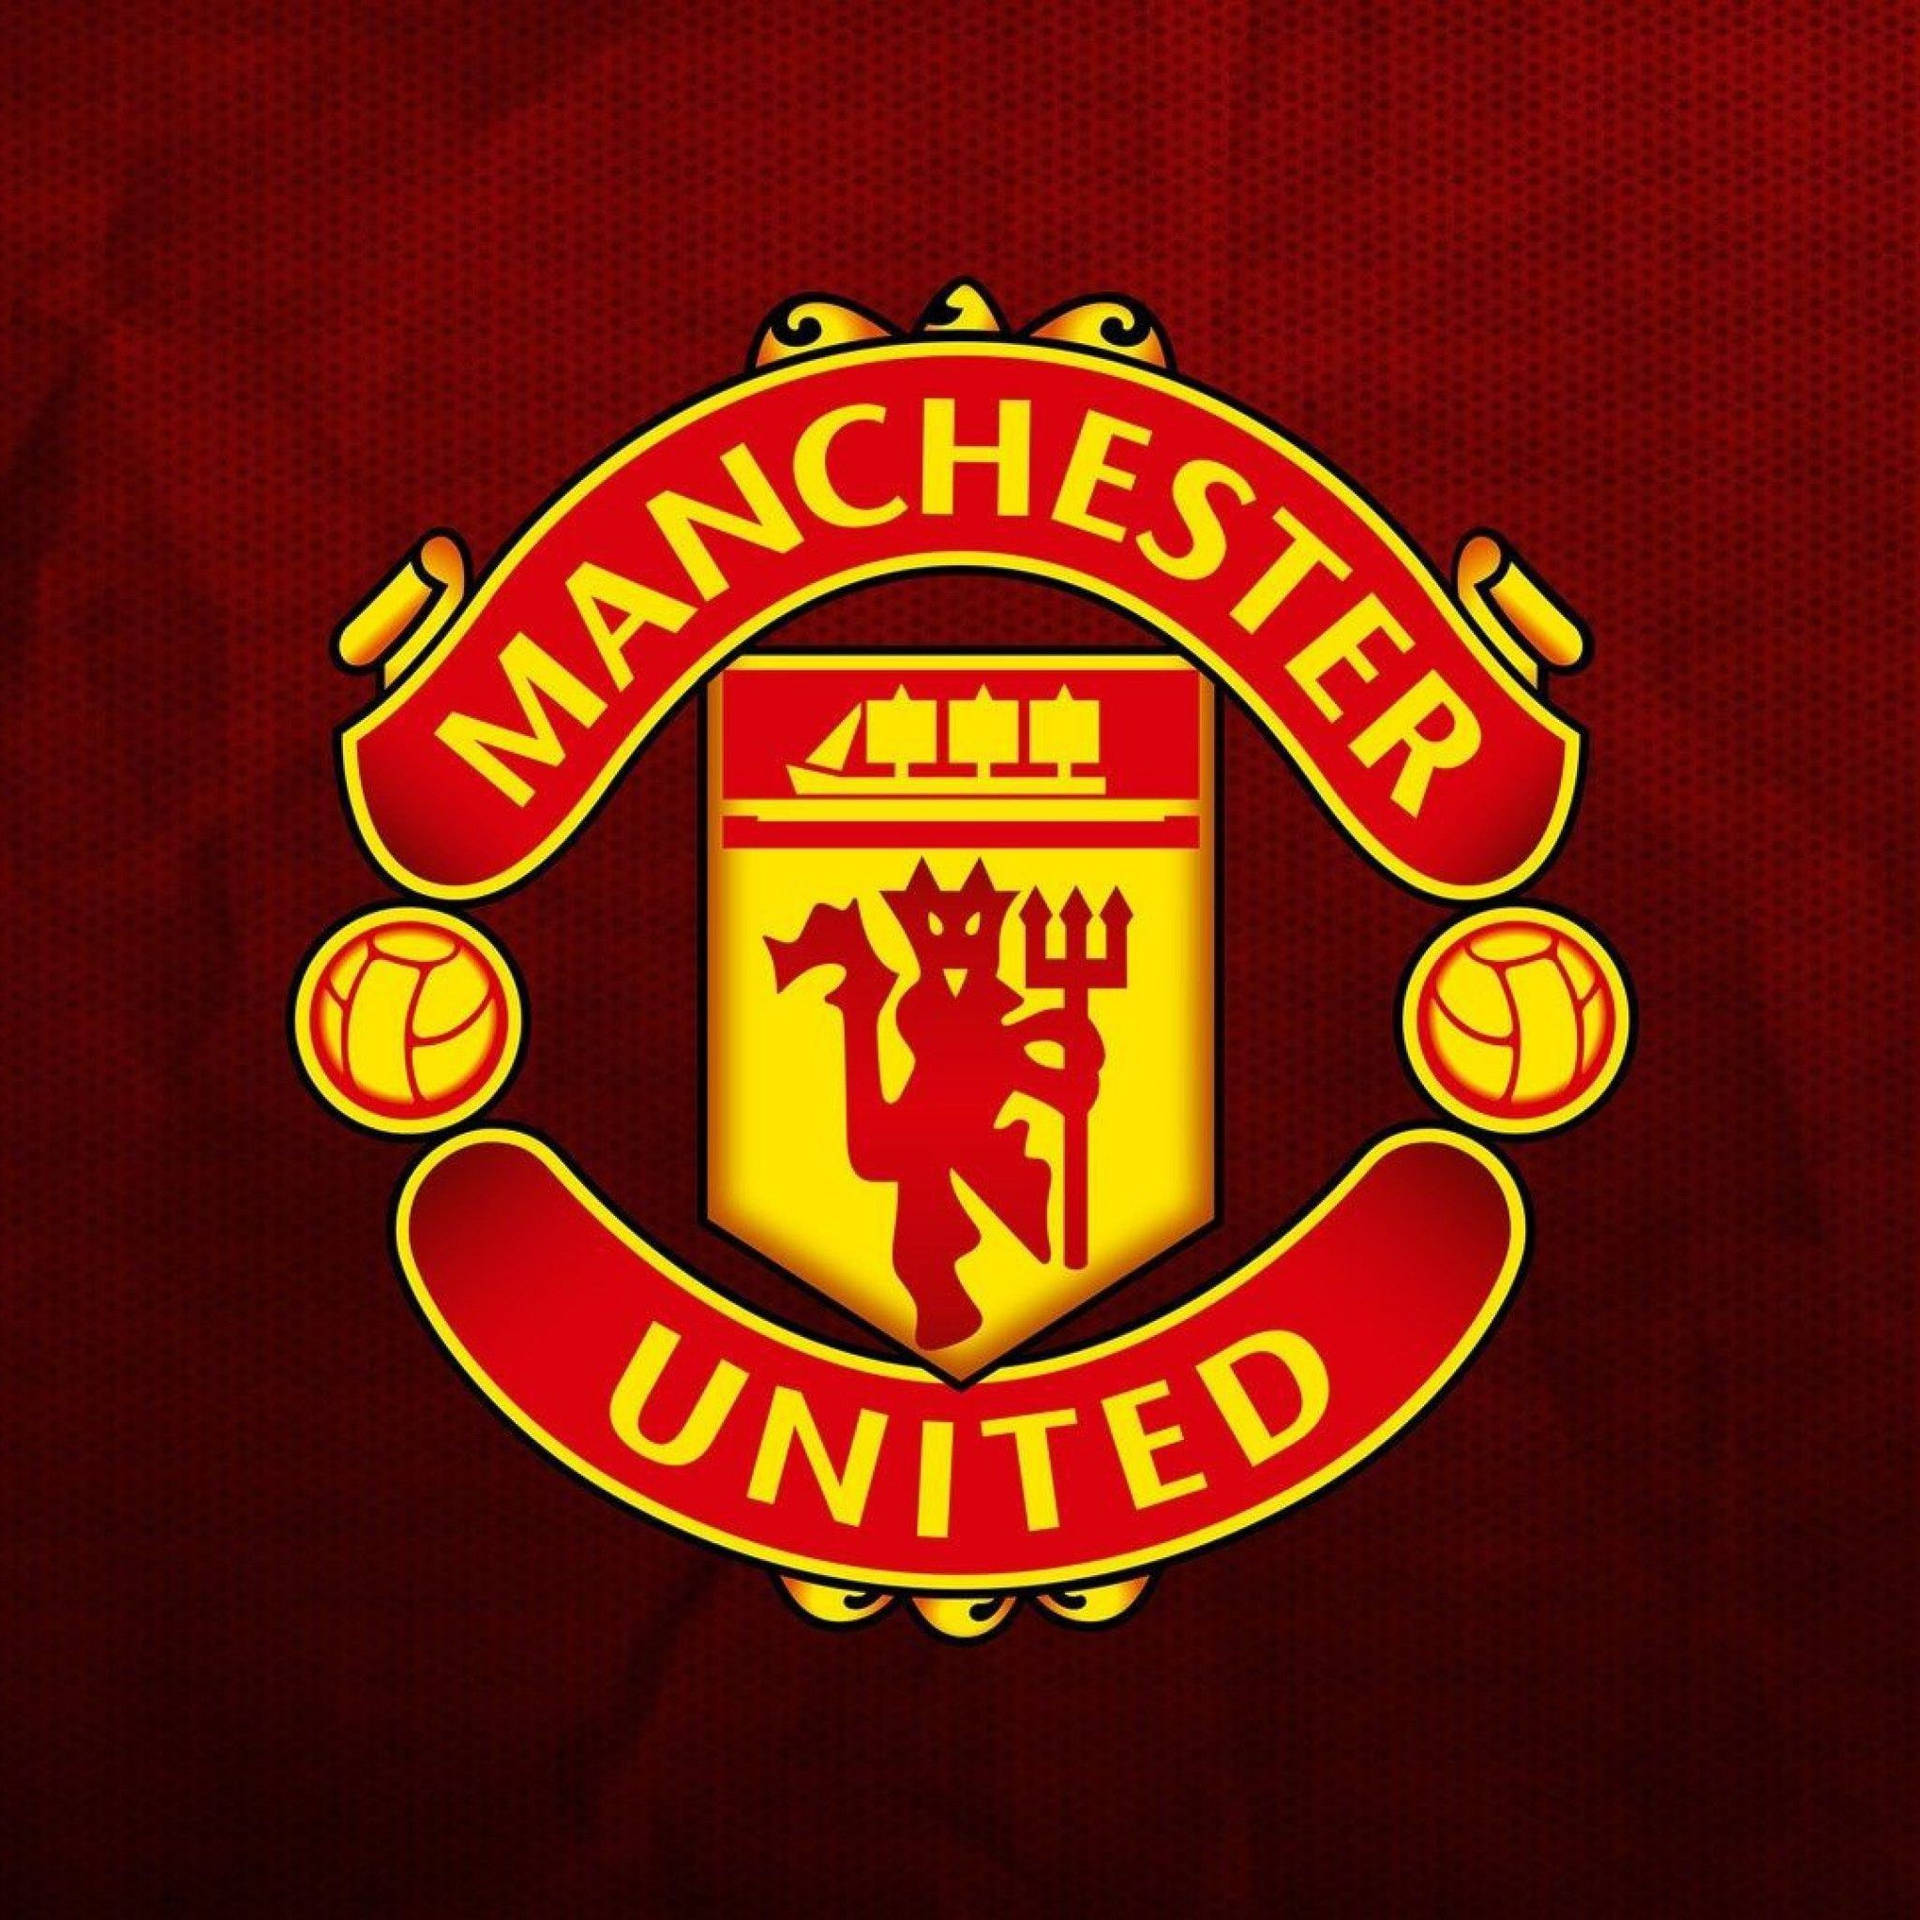 Manchester United - Leading the Way Wallpaper